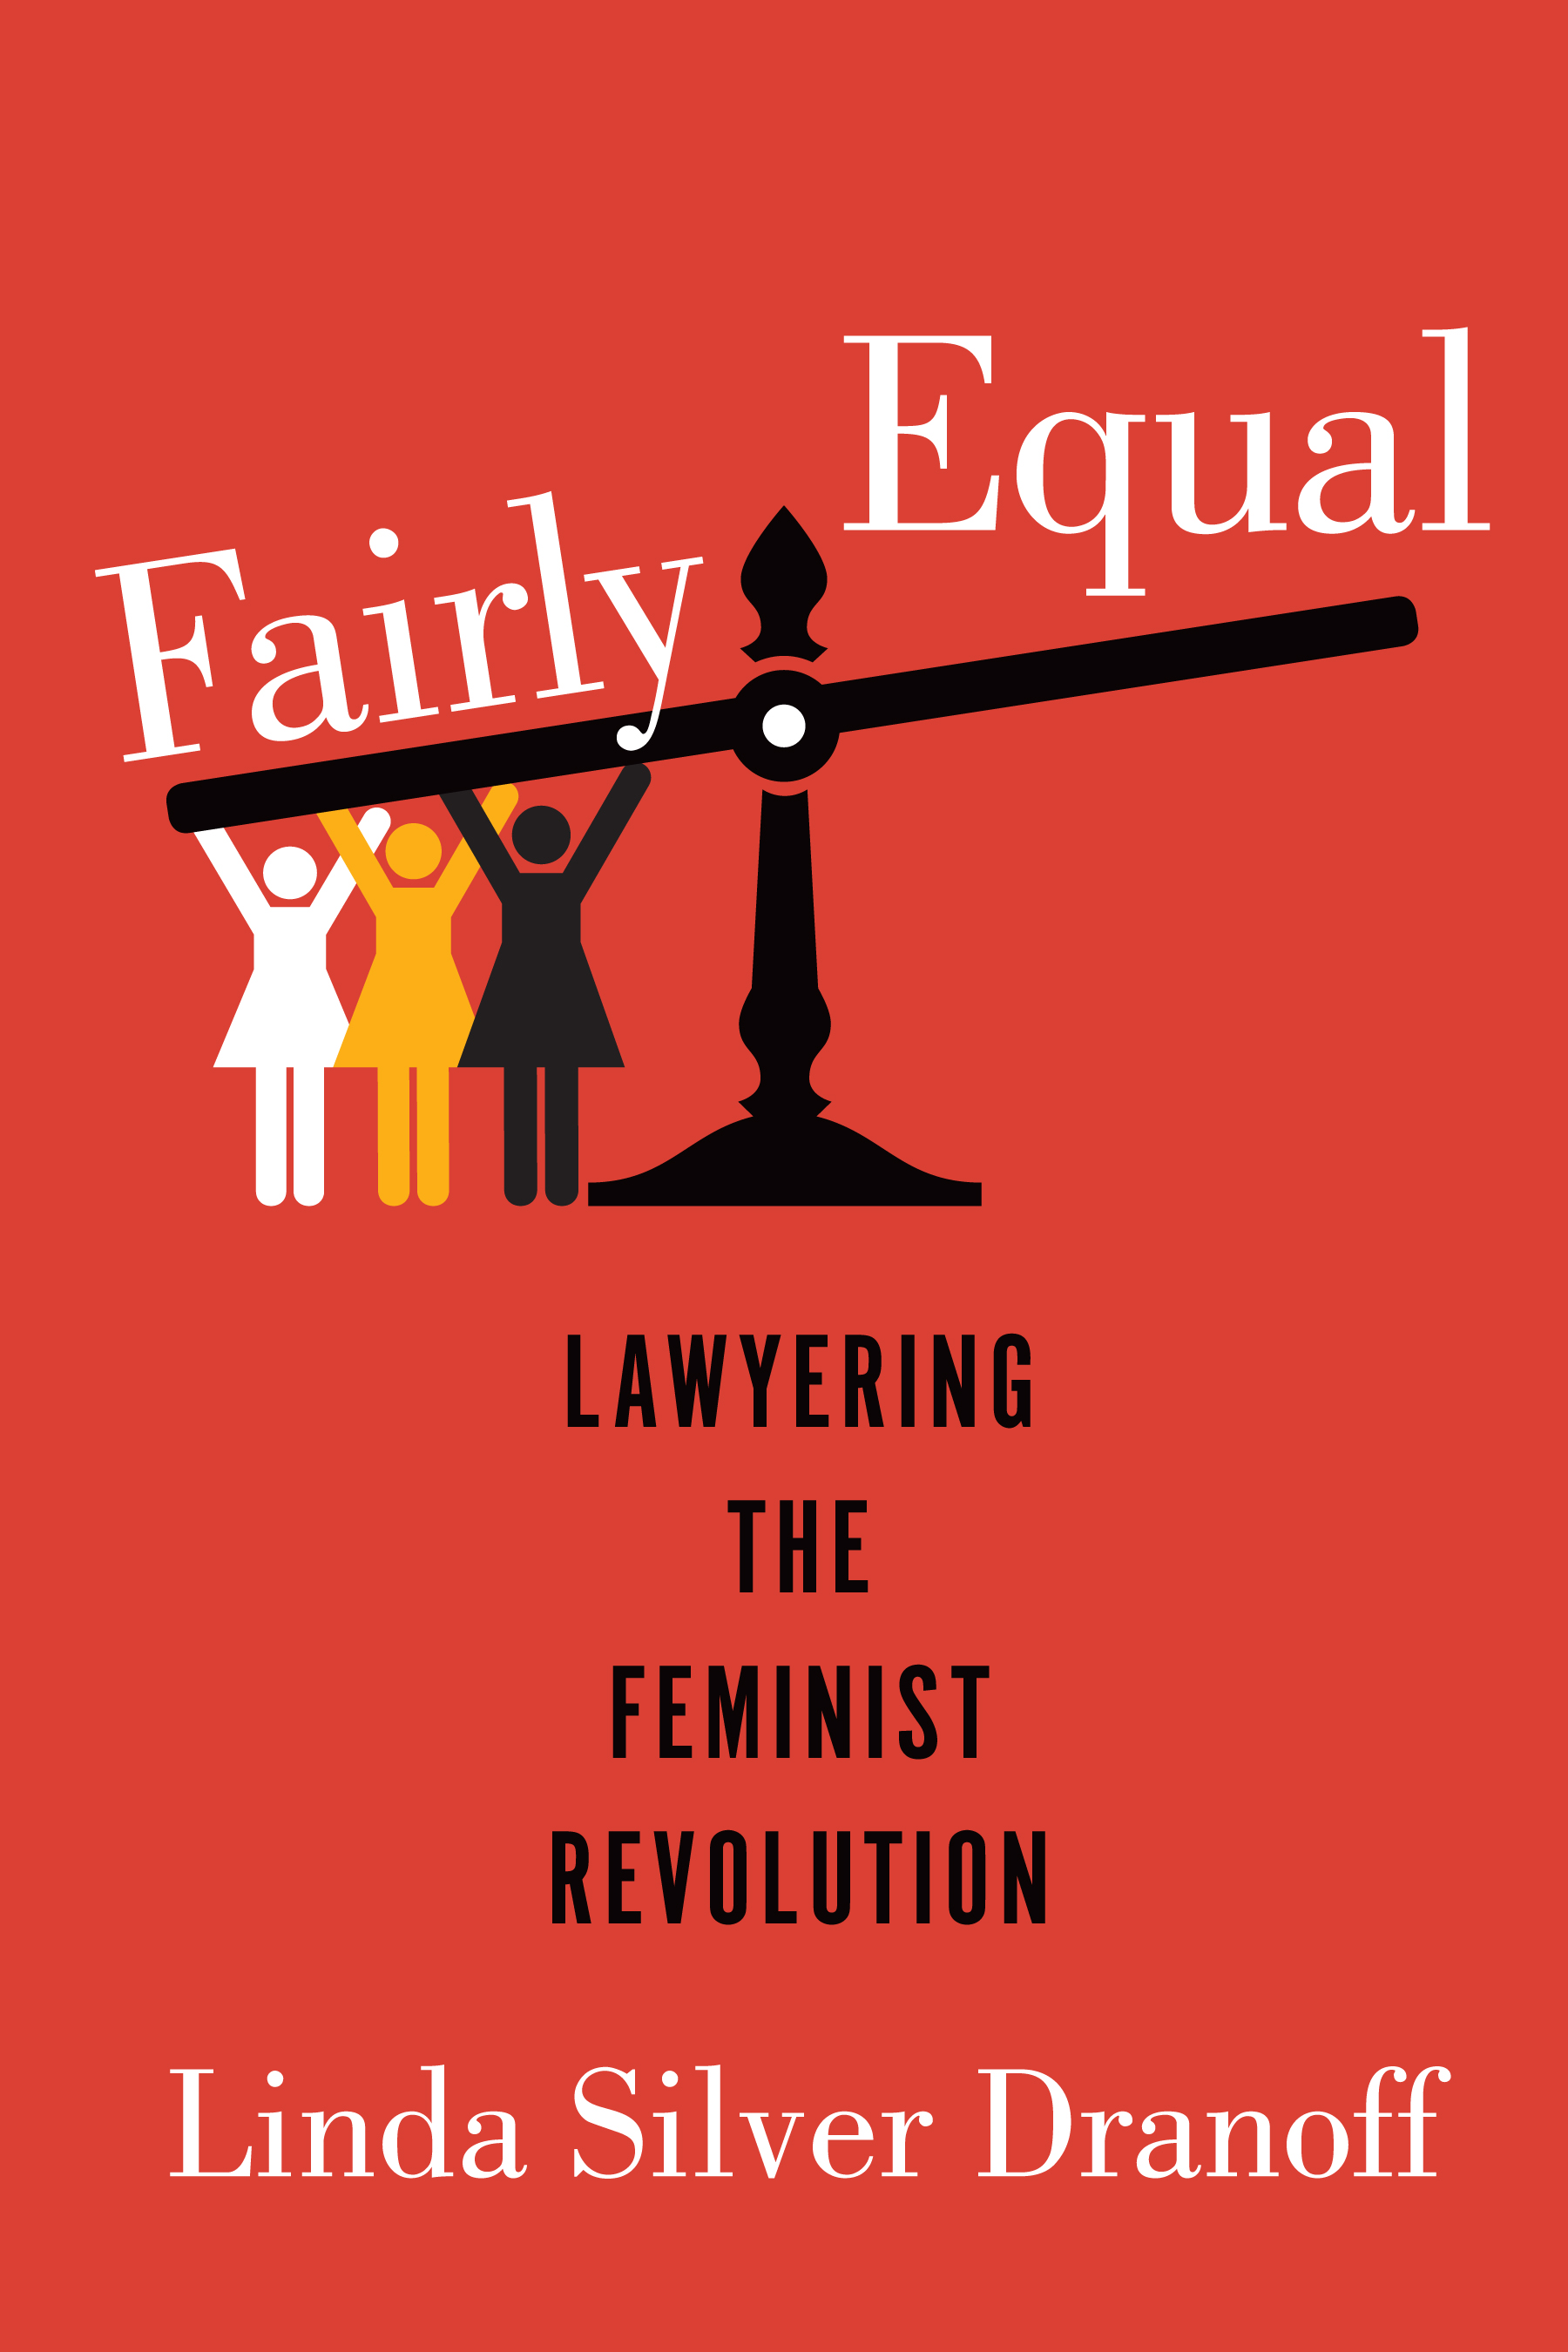 Fairly Equal: Lawyering the Feminist Revolution